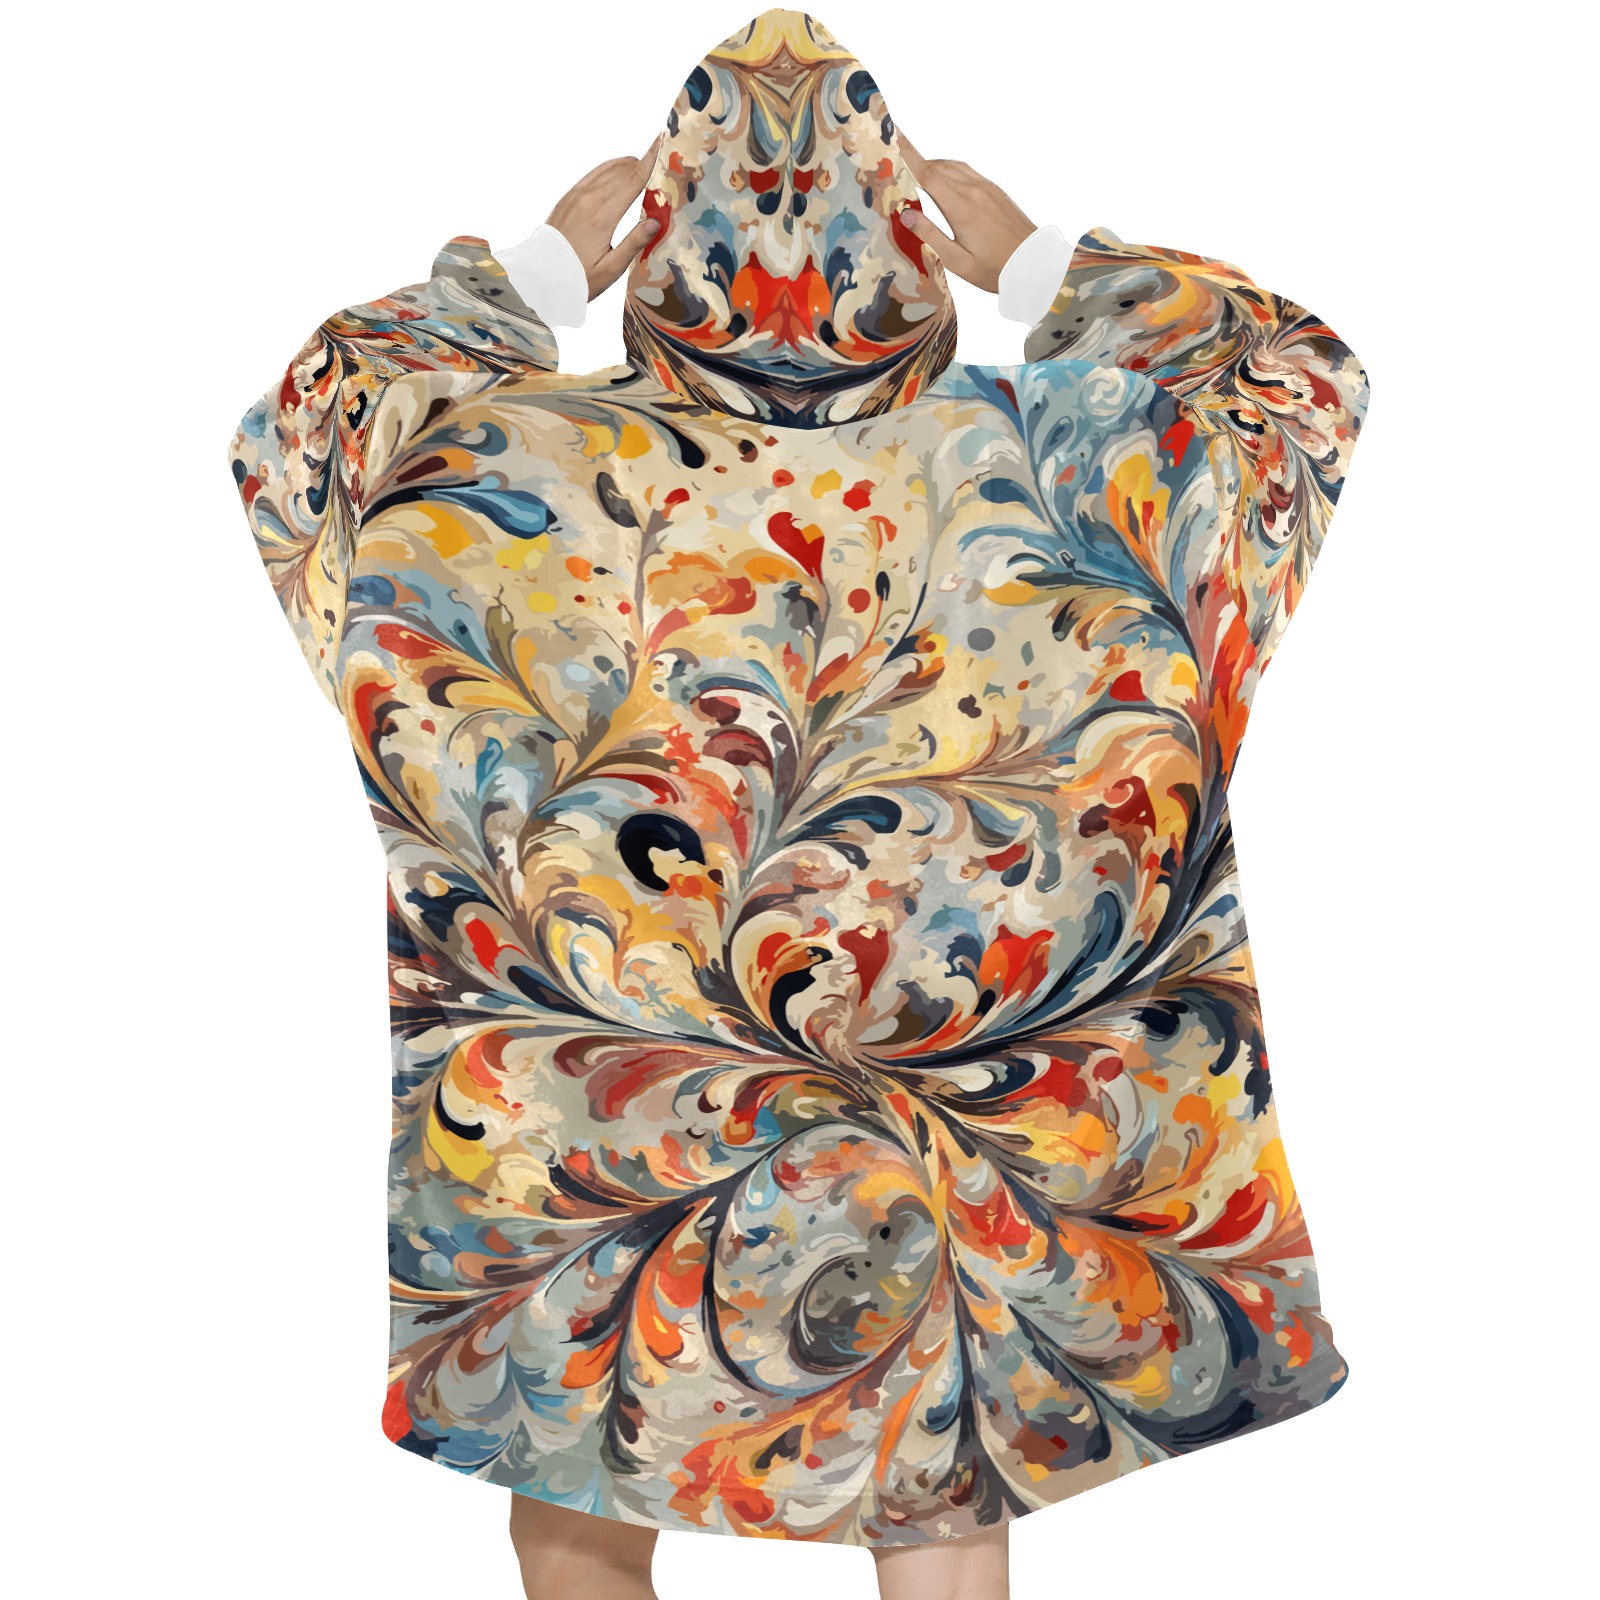 Stylish floral ornament. Beautiful colorful art Blanket Hoodie for Women